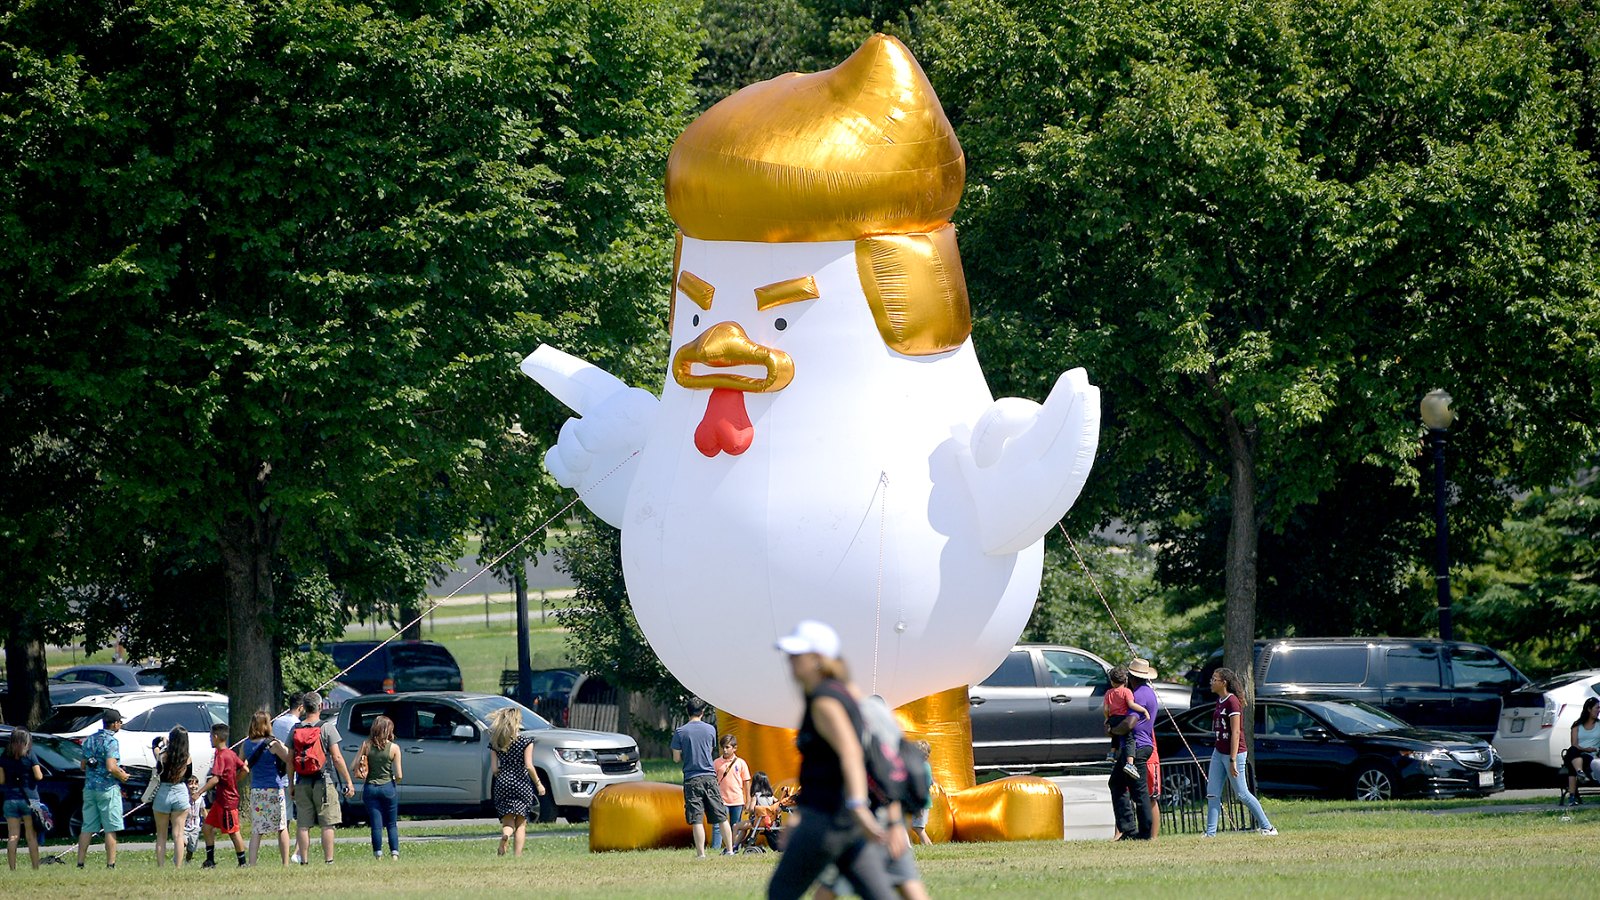 An inflatable chicken mimicking President Donald Trump is set up on the Ellipse in Washington, D.C., on August 9, 2017.